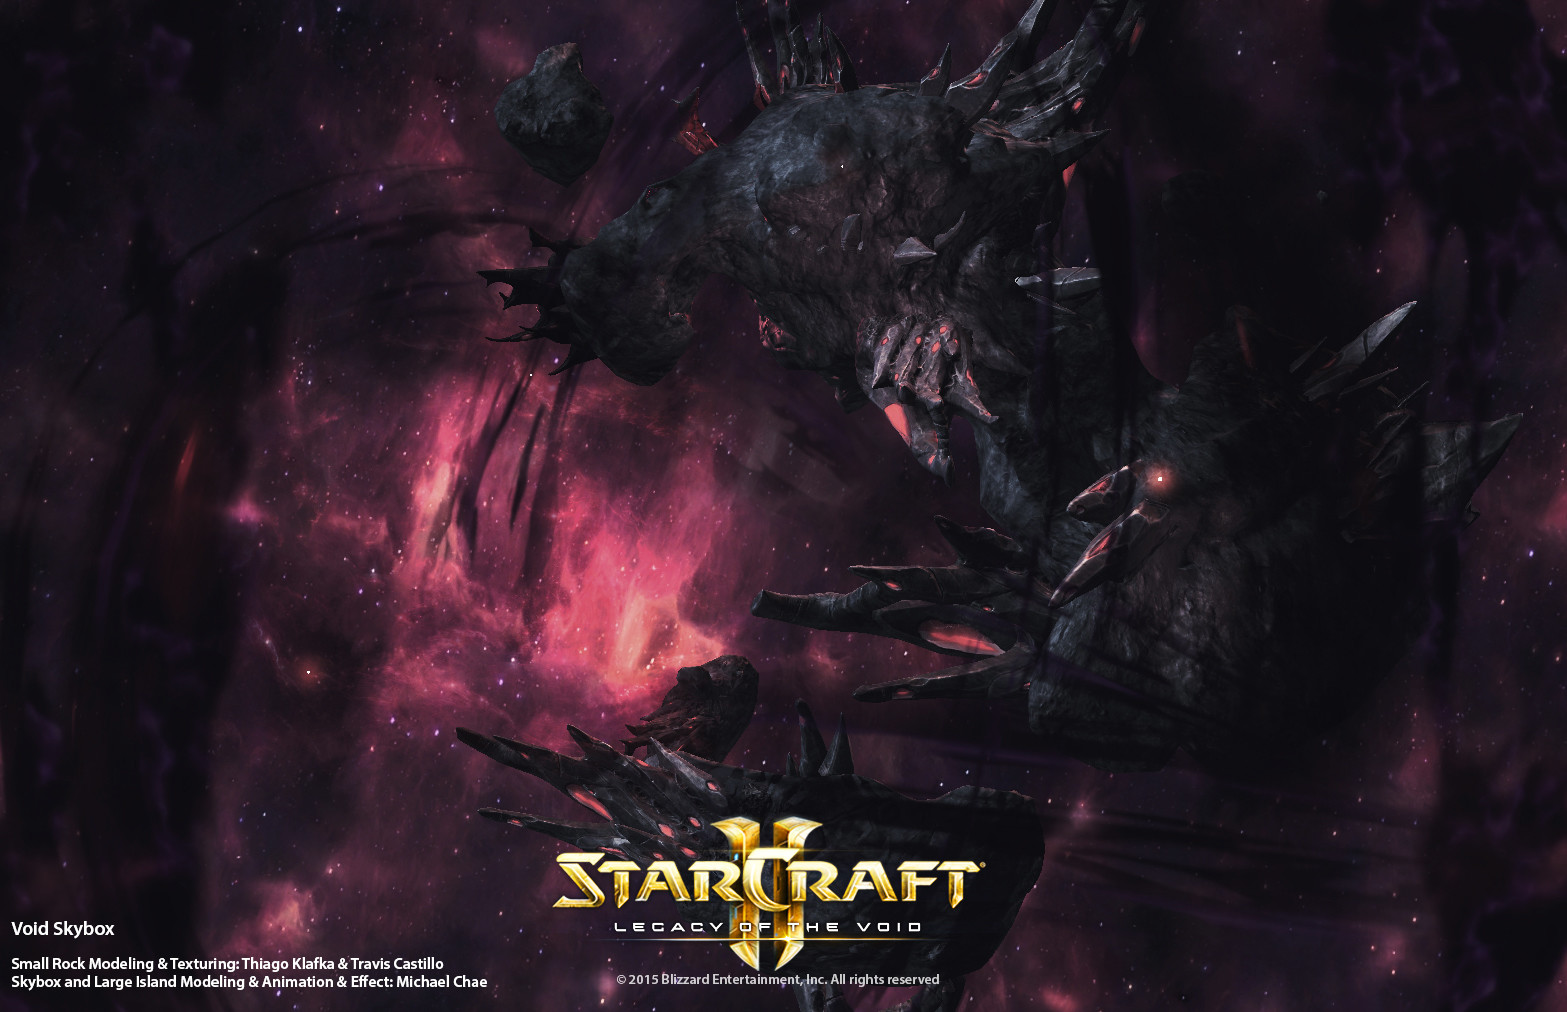 Voices of the void 1. STARCRAFT 2 Legacy of the Void заставка. Огонь Небесный старкрафт 2 биомасса. Void Art. The Void 2016.